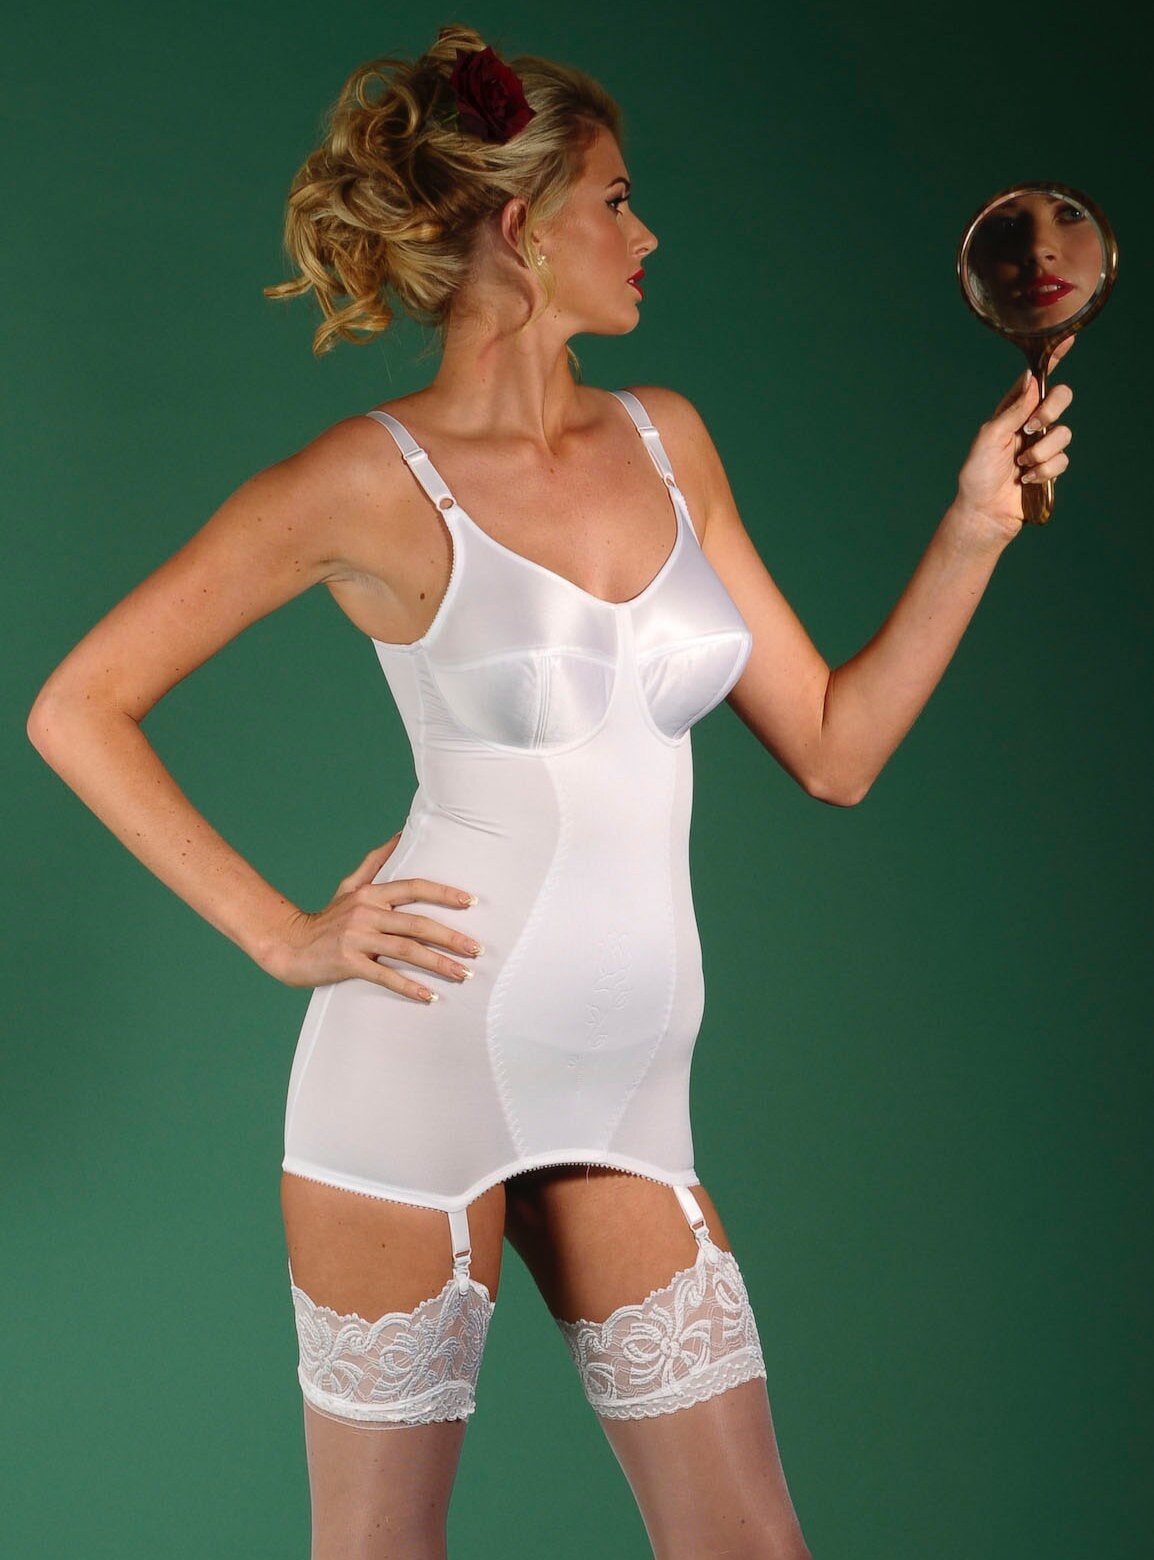 All in One Girdle -  UK